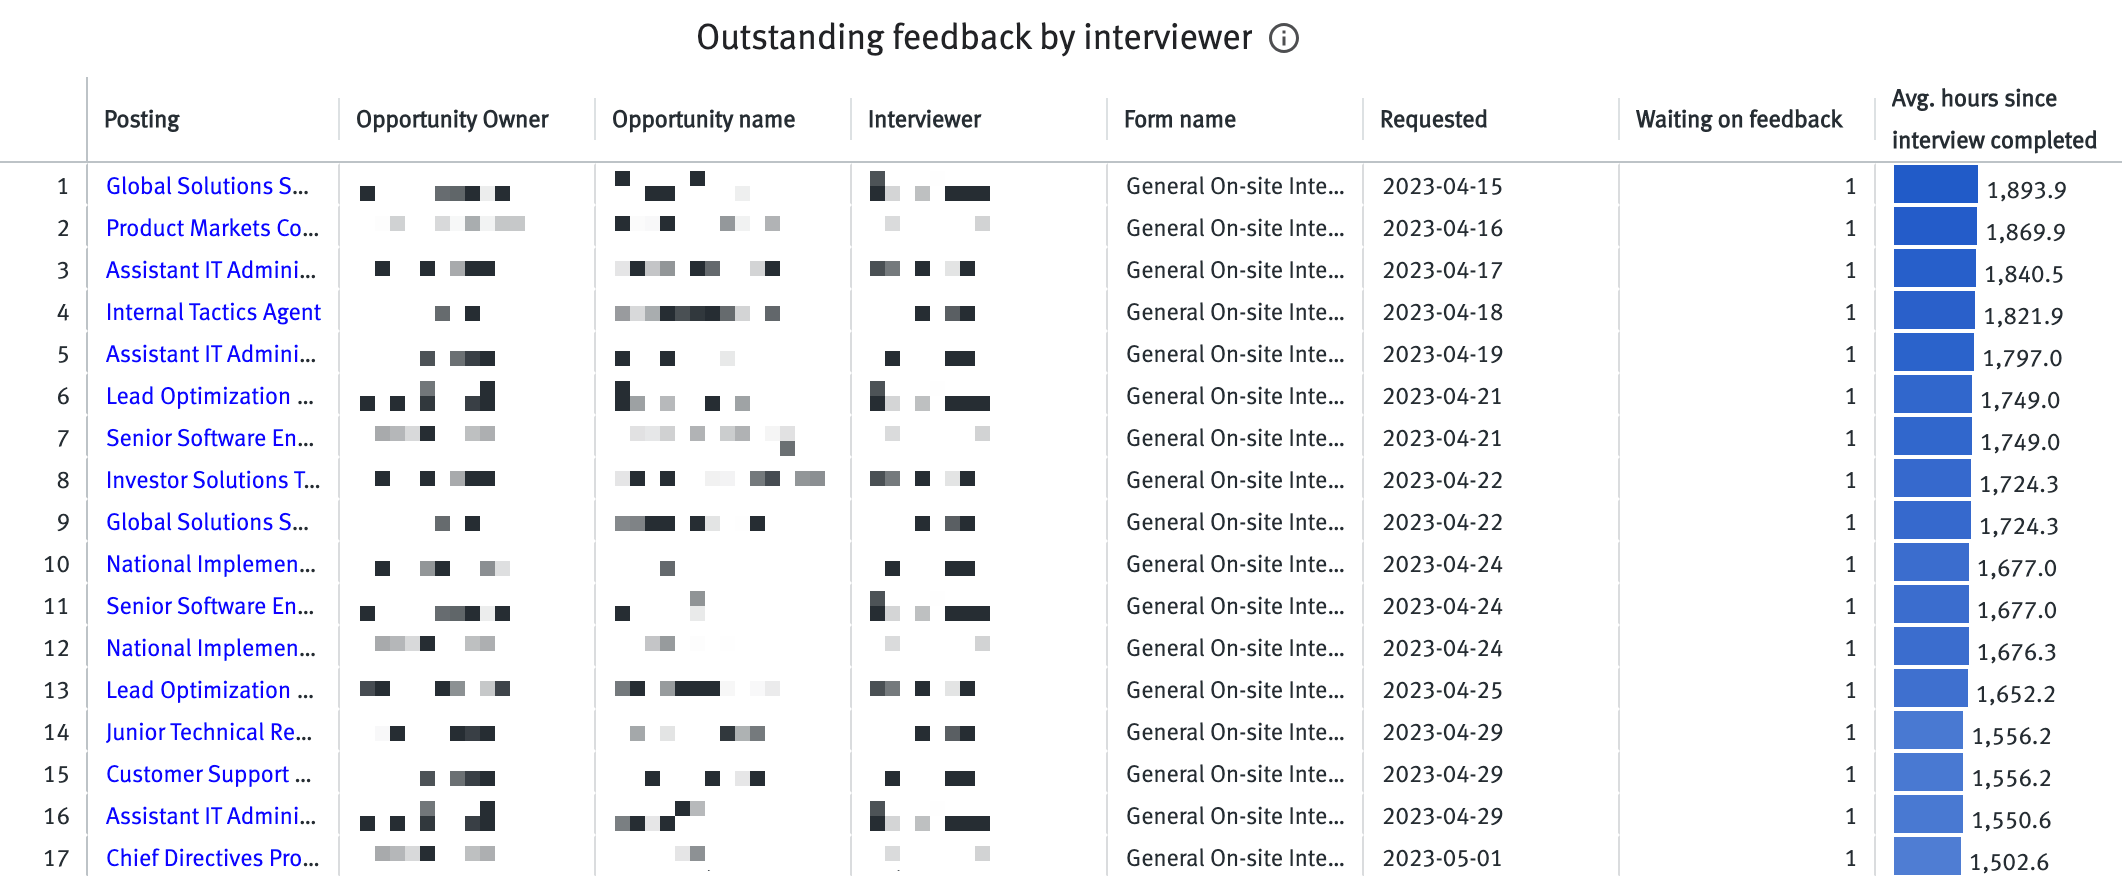 Outstanding feedback by interviewer chart